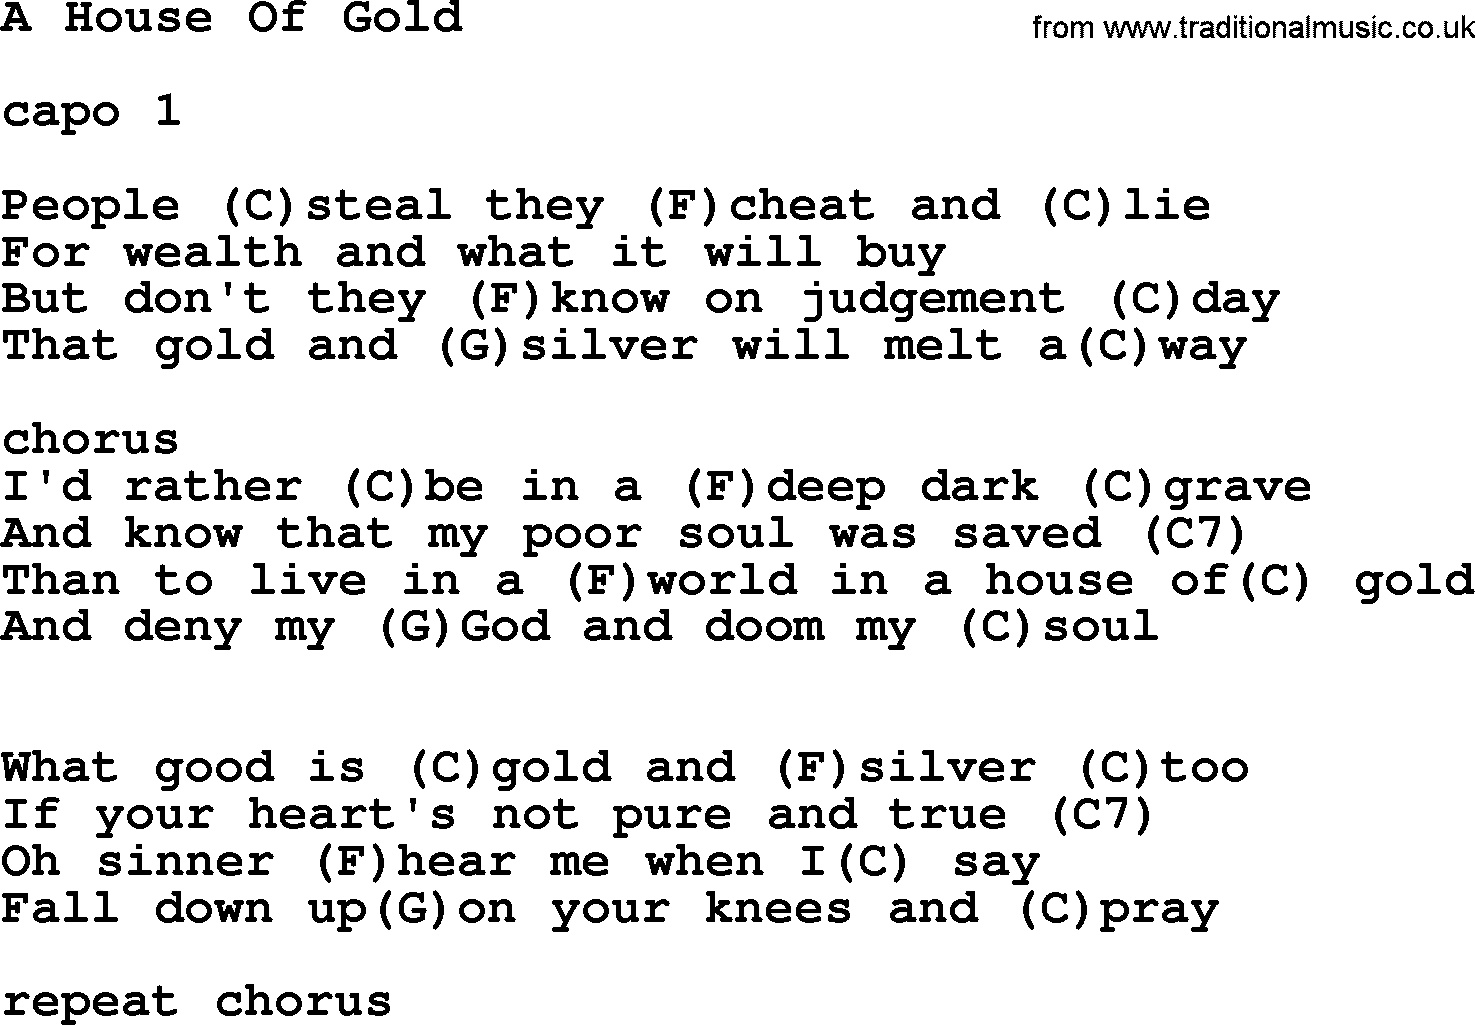 Hank Williams song A House Of Gold, lyrics and chords